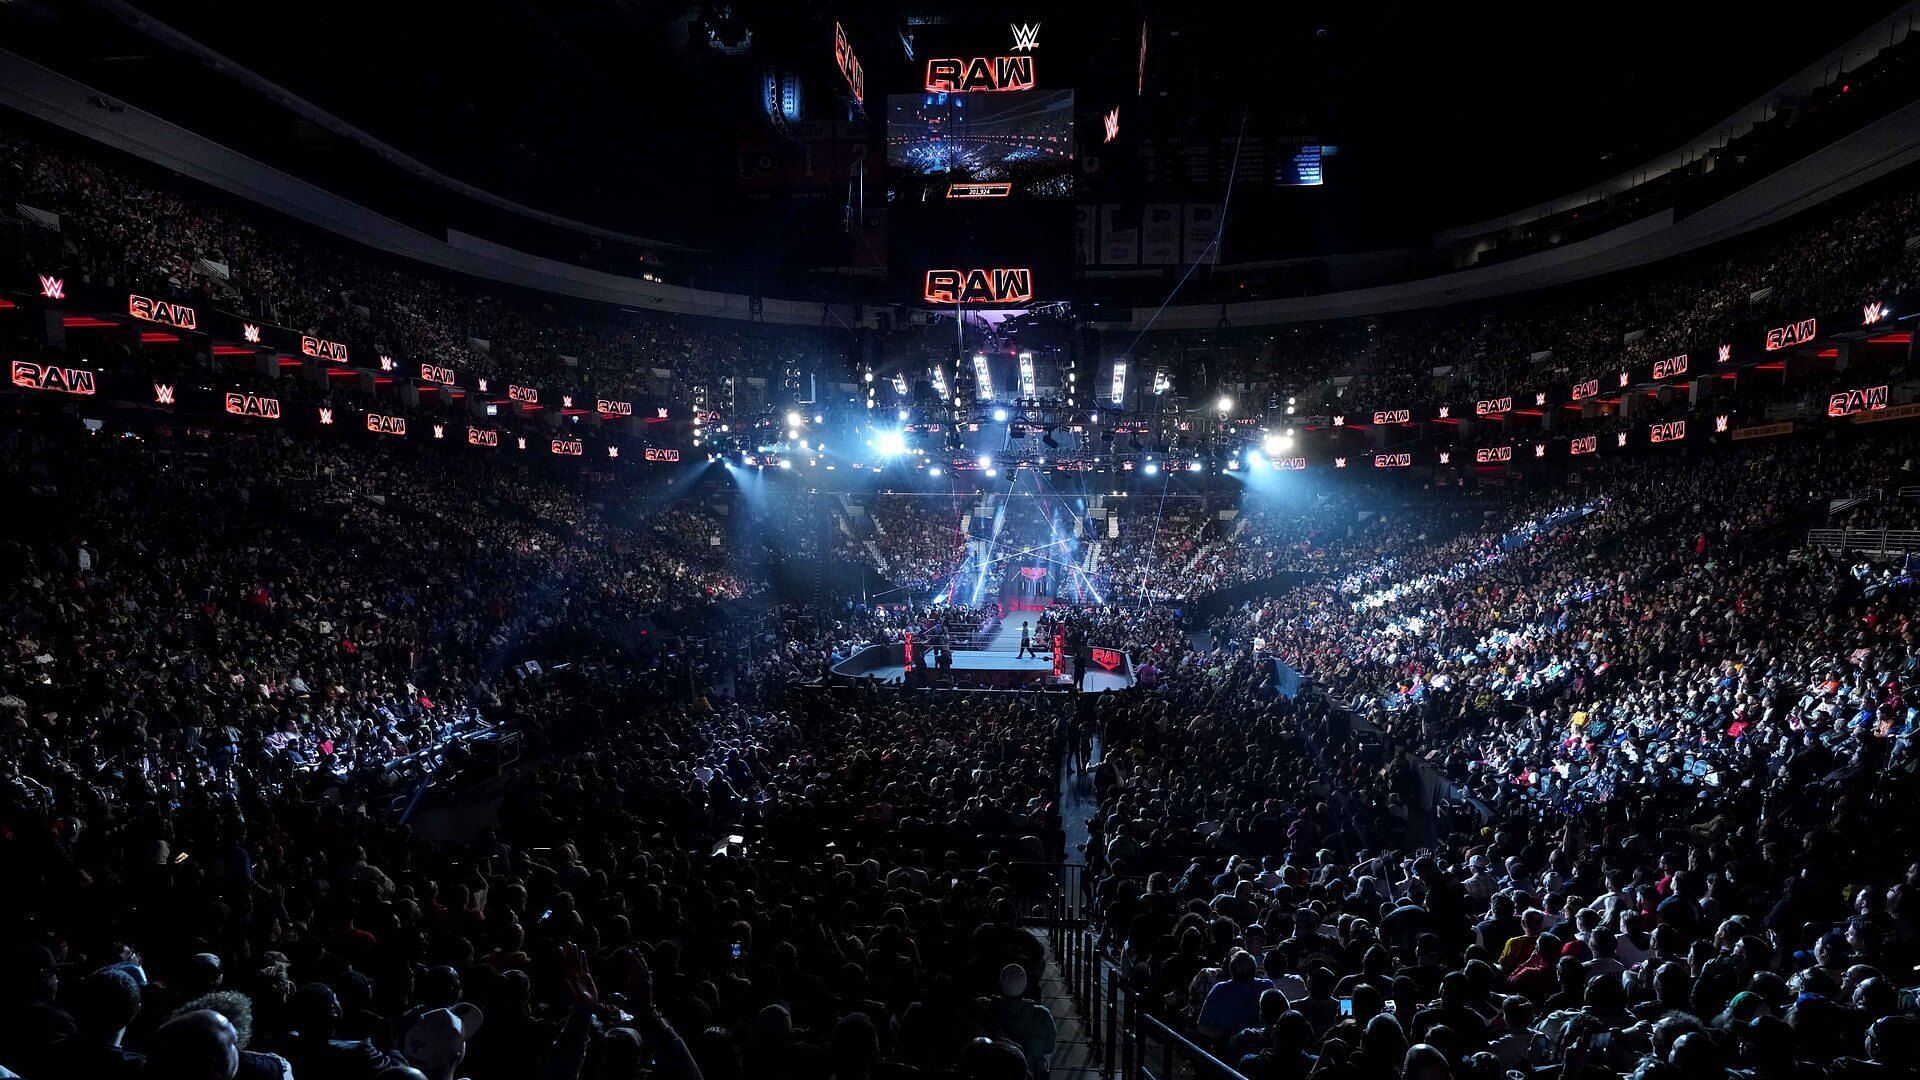 The WWE Universe packs the Wells Fargo Center in Philadelphia for RAW After WrestleMania XL